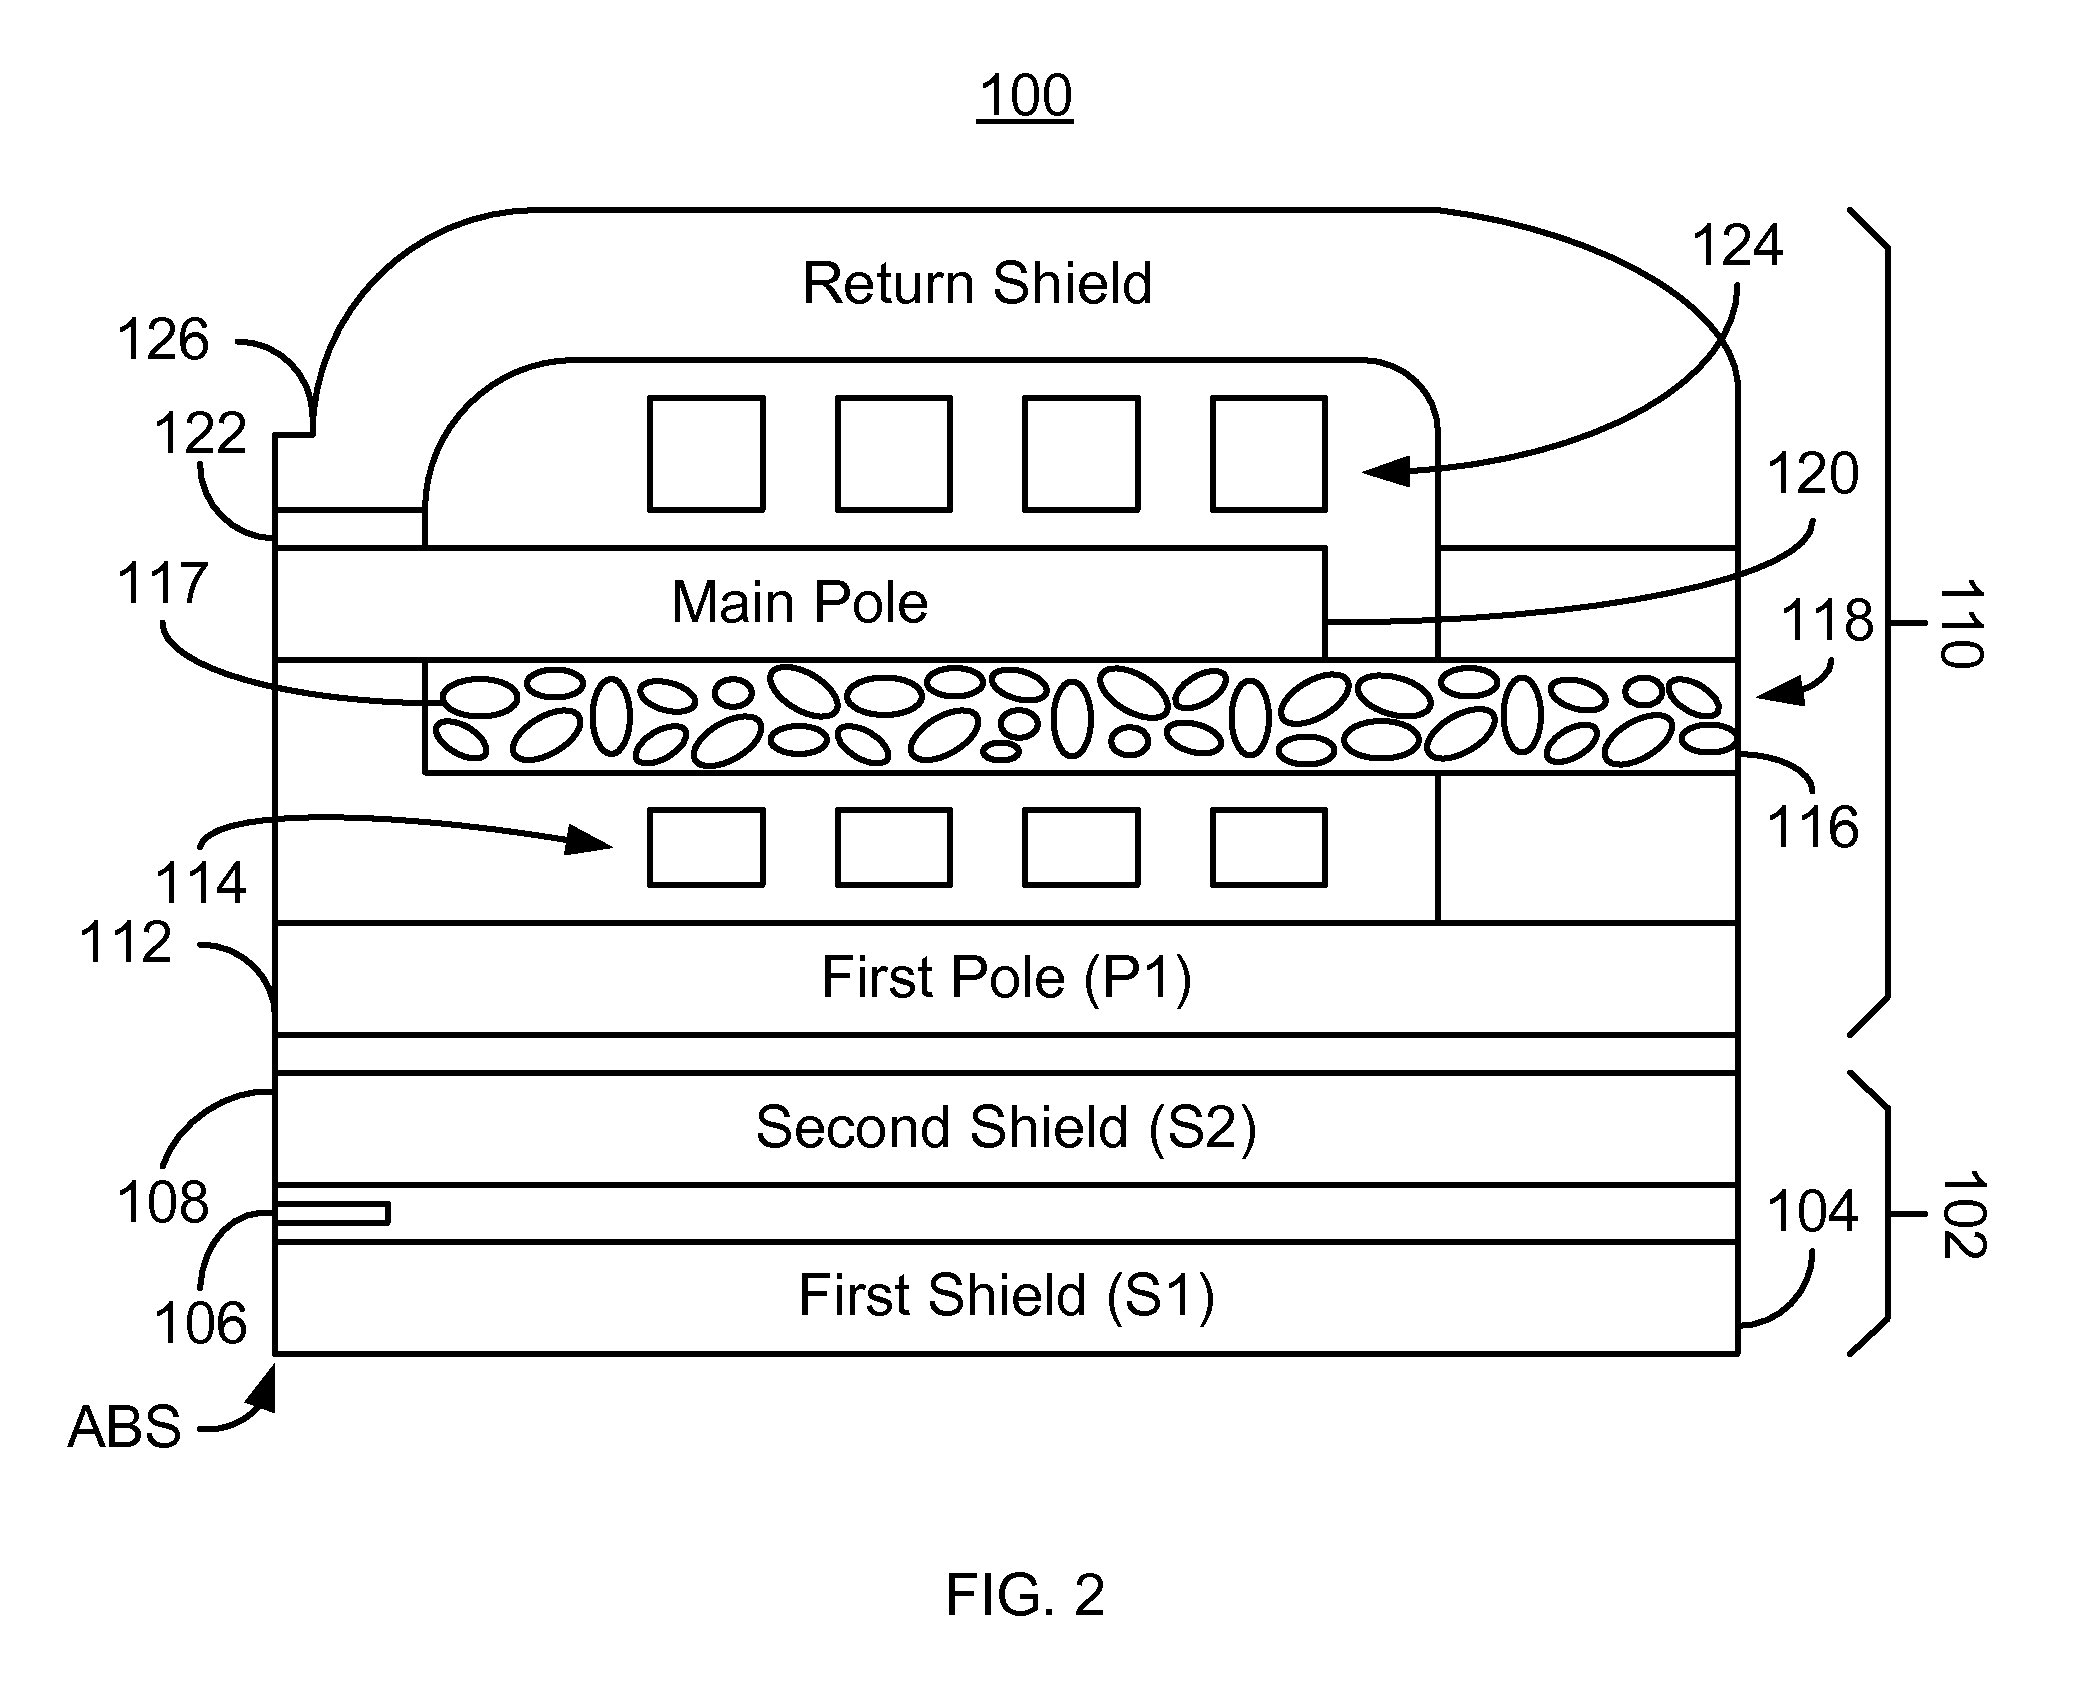 Method and system for providing a magnetic head using a composite magnetic material in the recording transducer